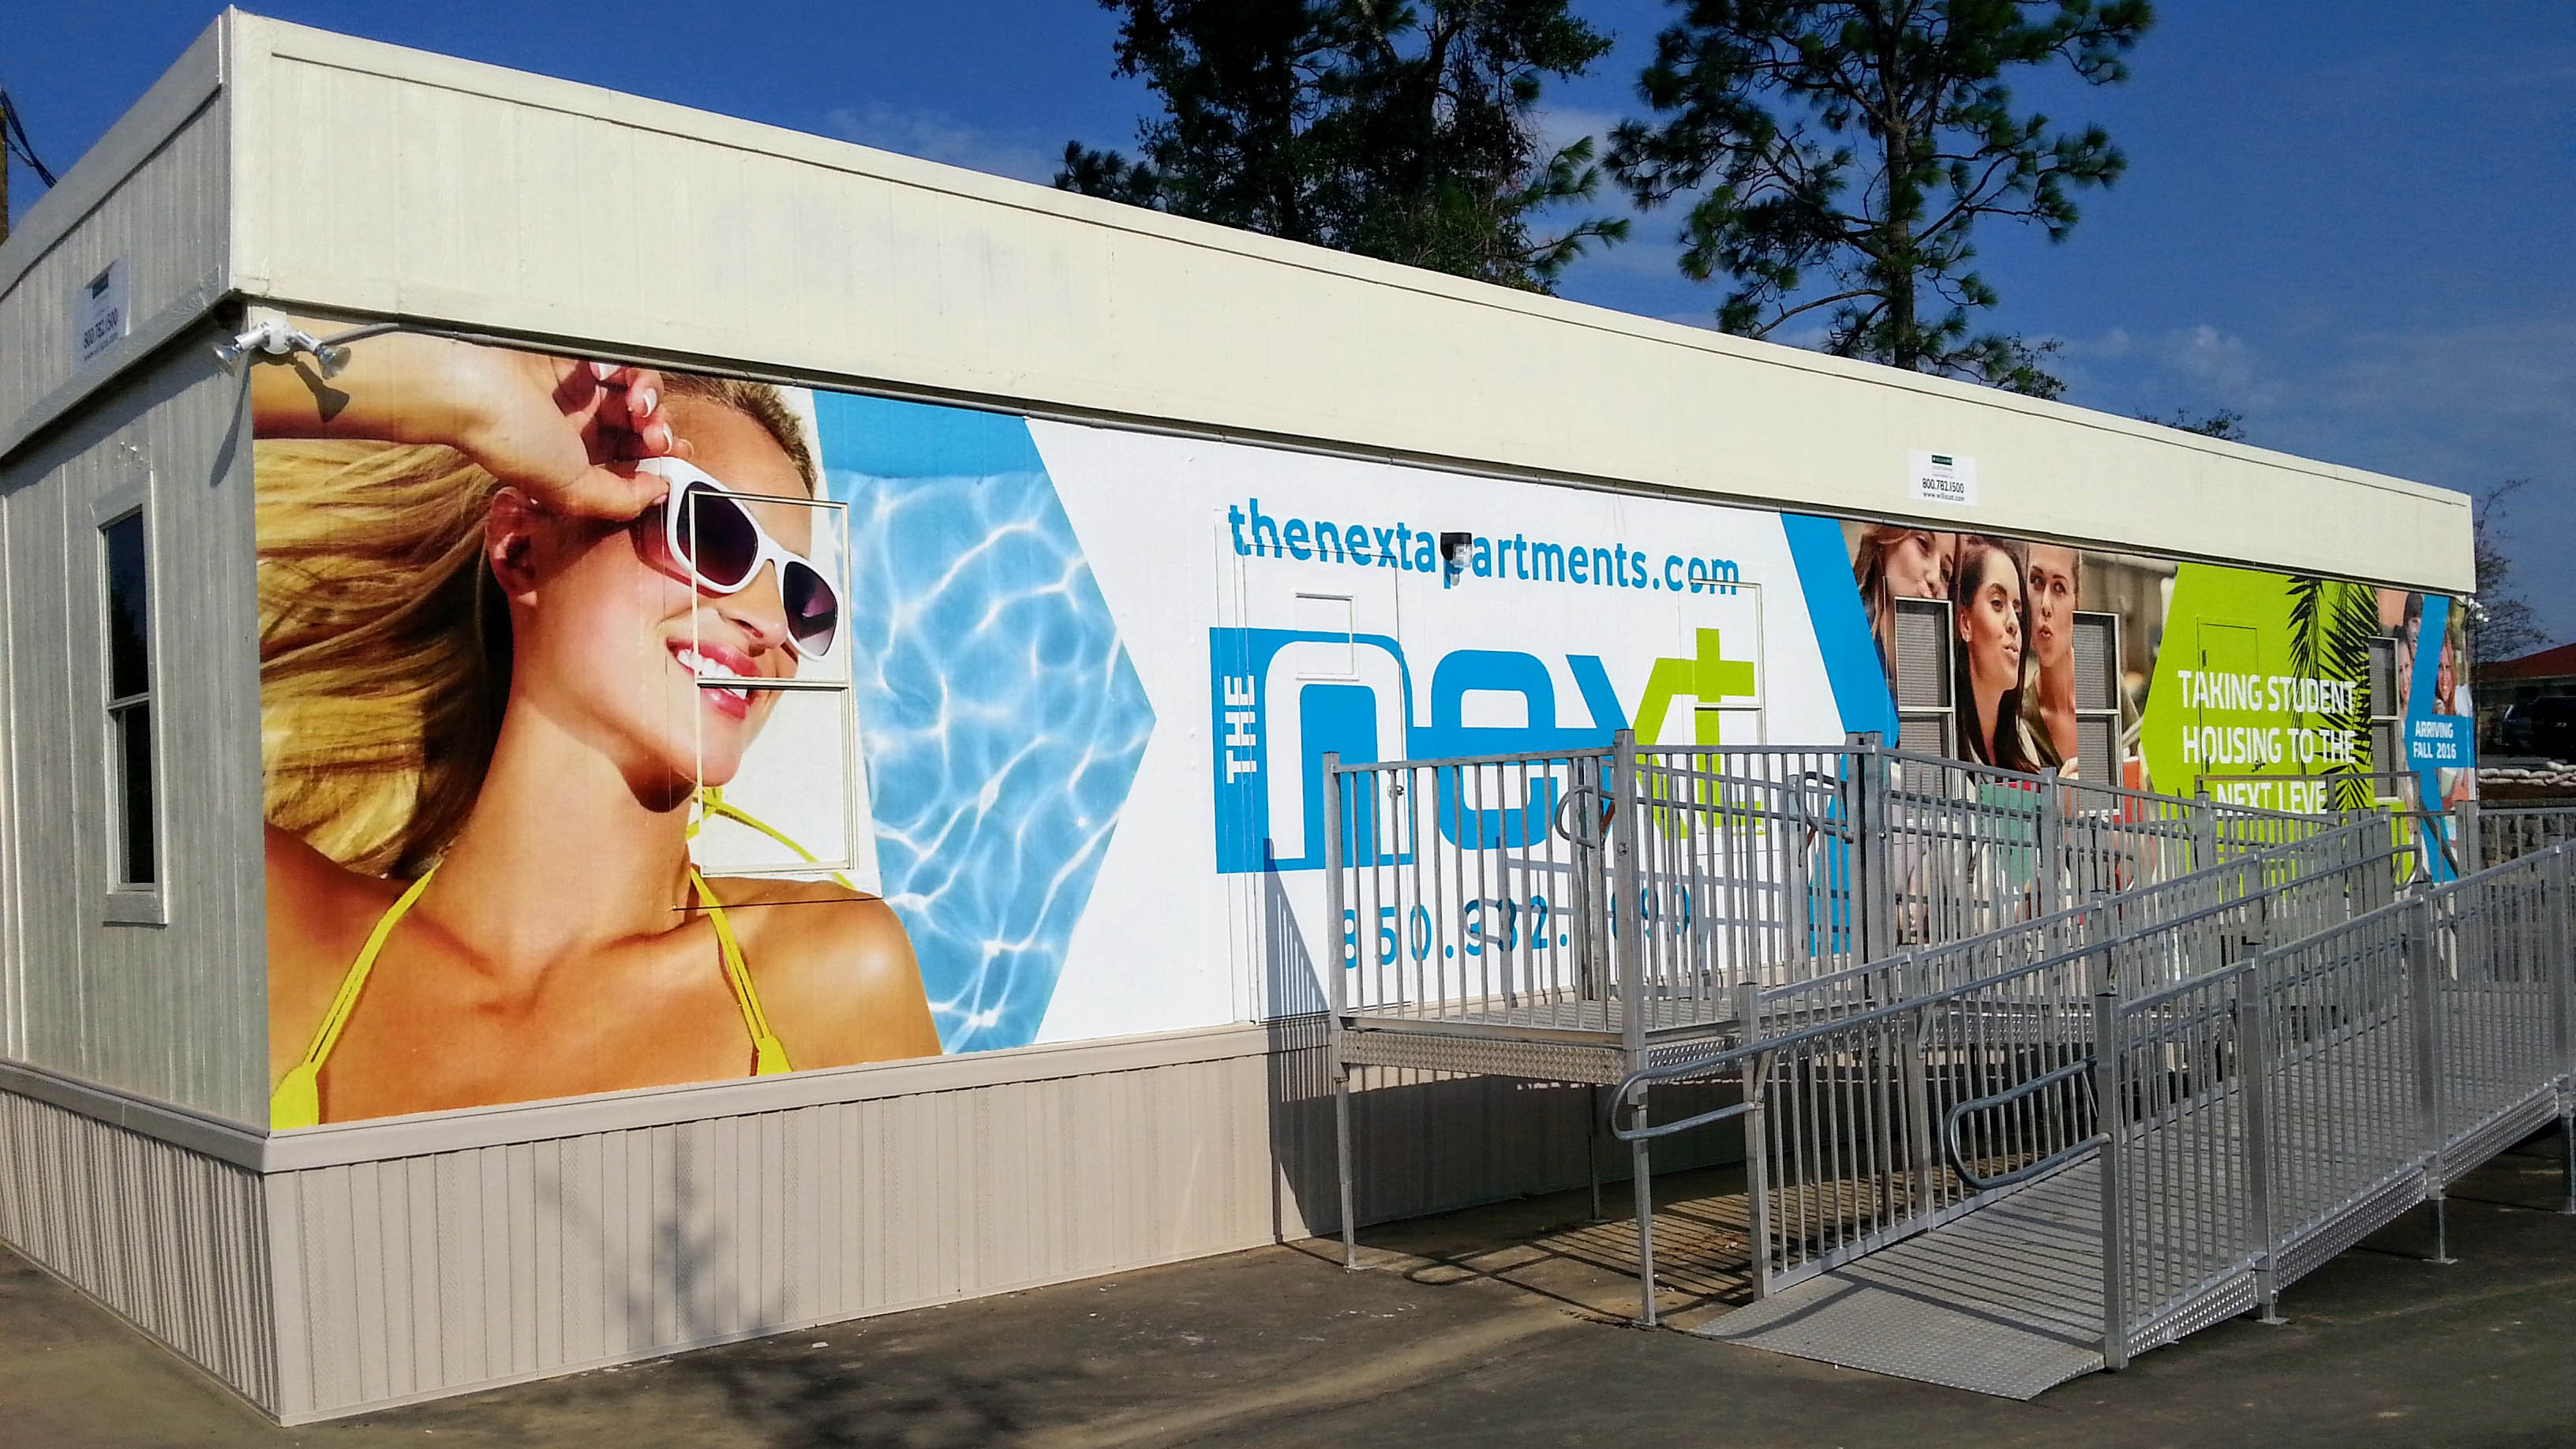 Wall wraps on building exterior - signgeek Wall Wraps & Environmental Graphics 